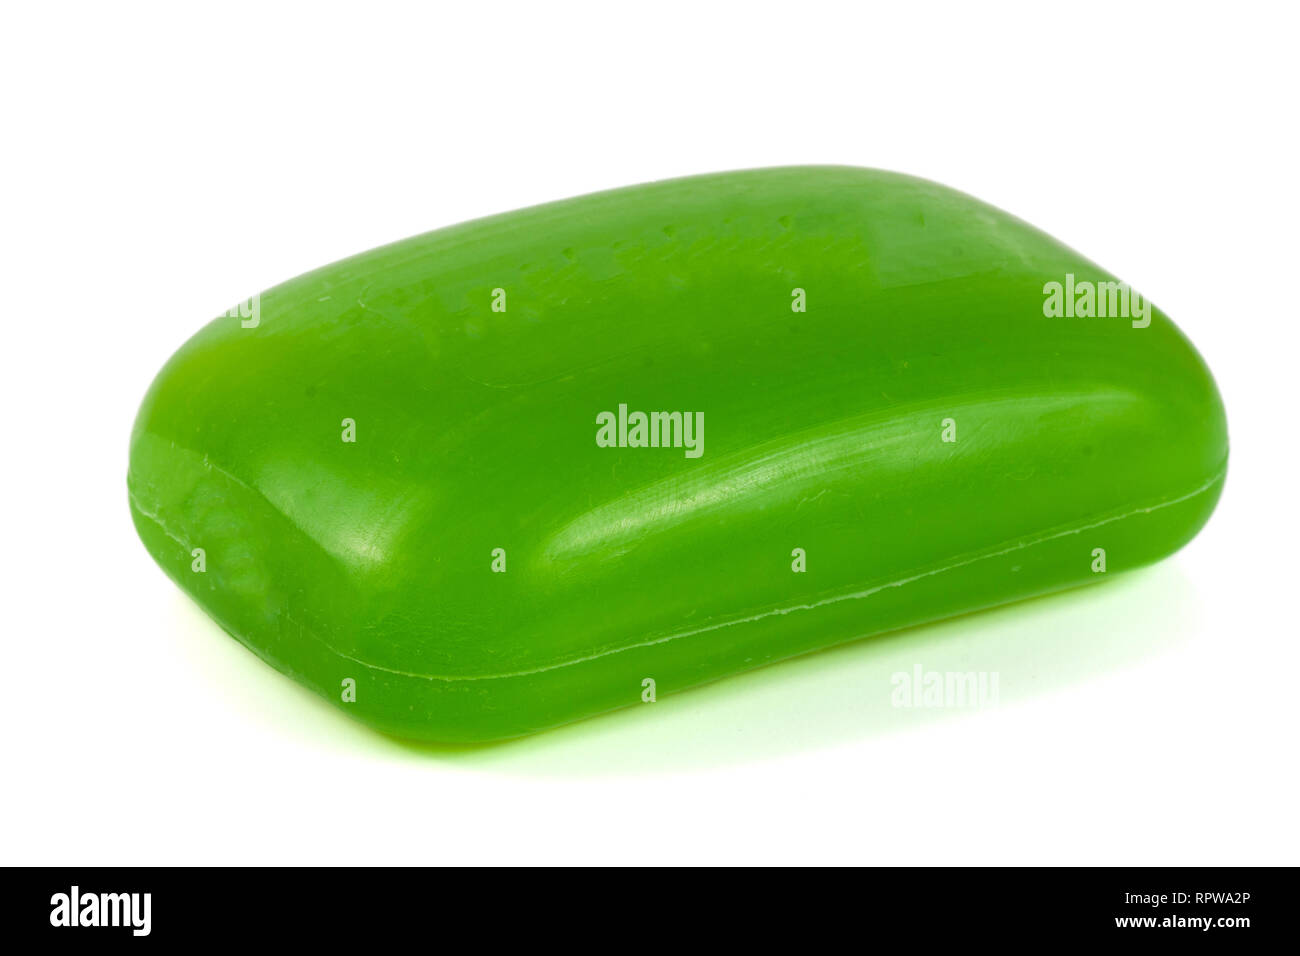 Glycerin green soap bar isolated on white background Stock Photo - Alamy